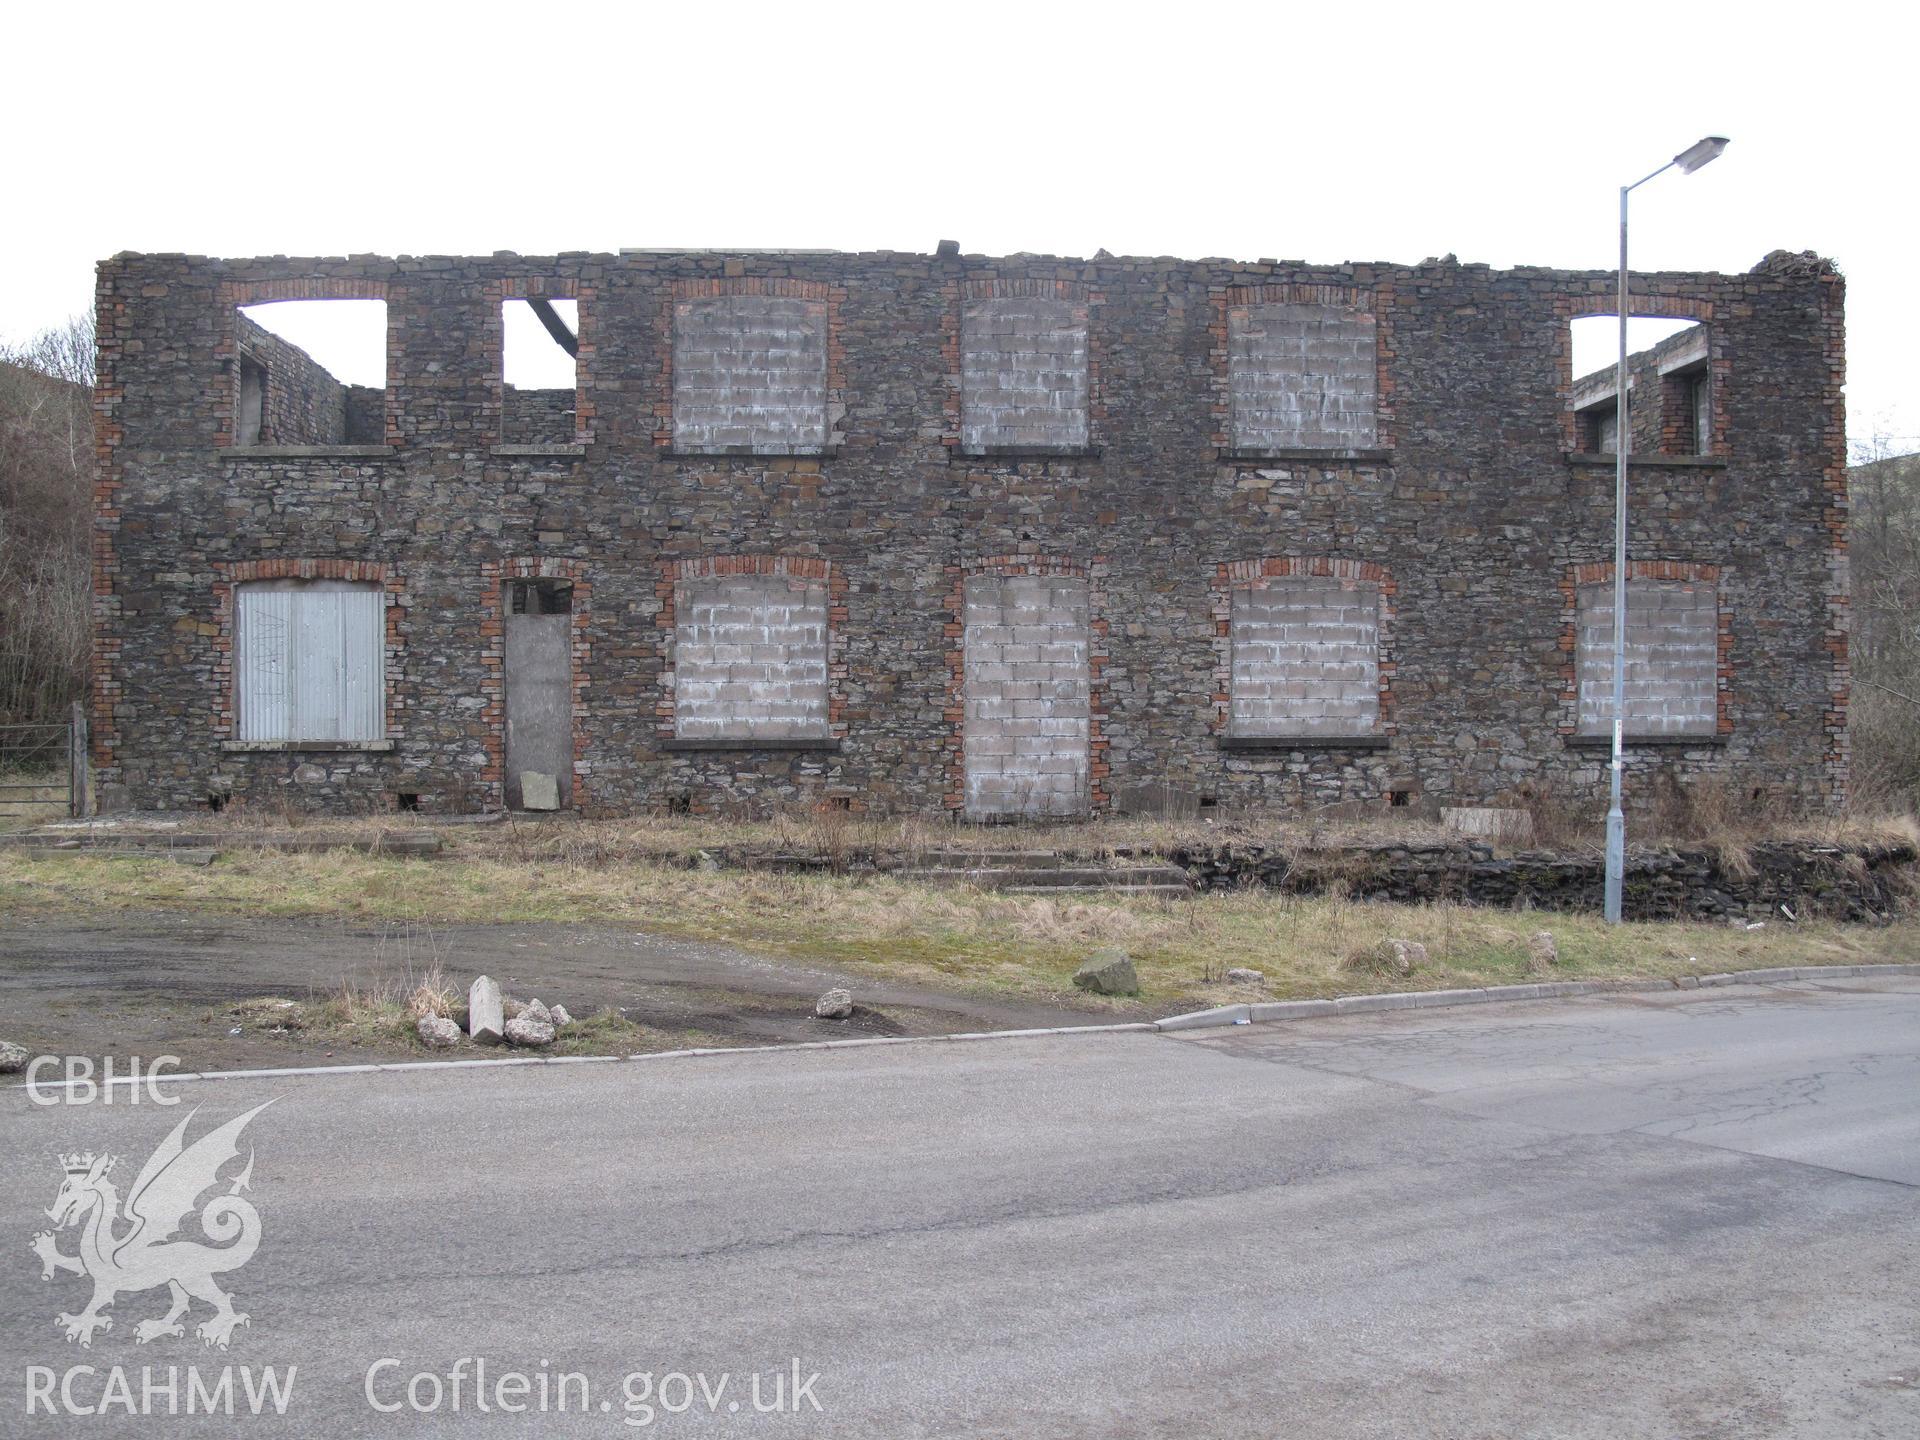 View of Universal Colliery Offices, Senghenydd, from the south, taken by Brian Malaws on 12 February 2010.